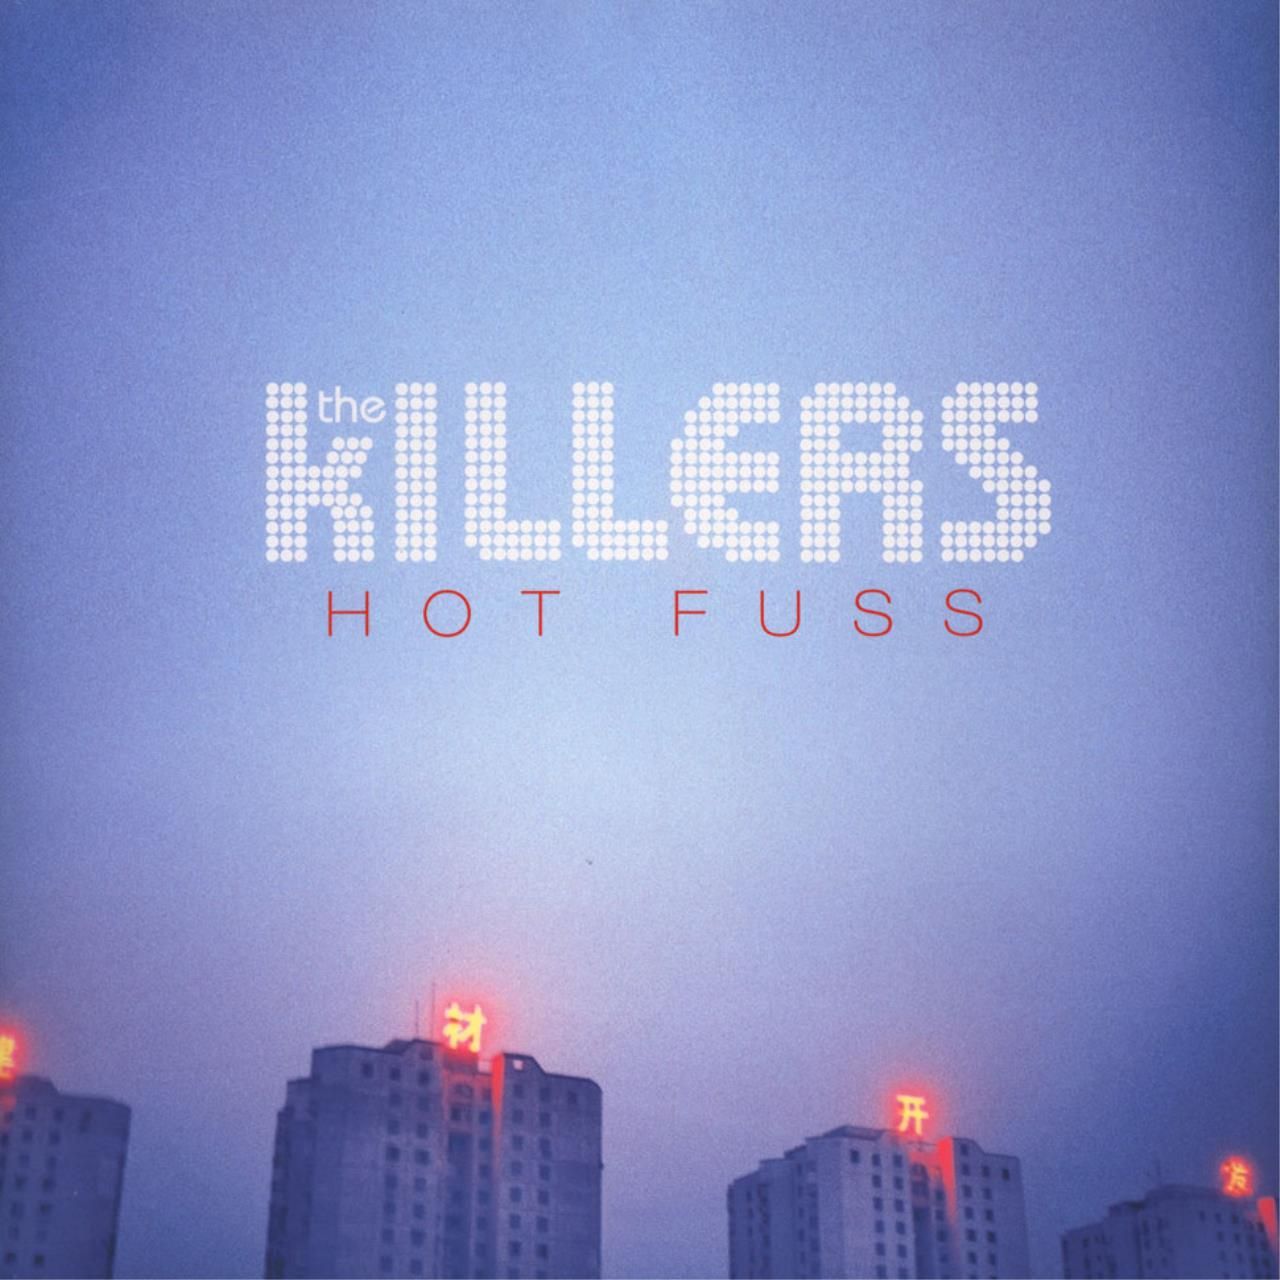 Somebody told me песня. The Killers Somebody told me. Brightside. Don't Fuss фото. The Killers hot Fuss Vinyl.